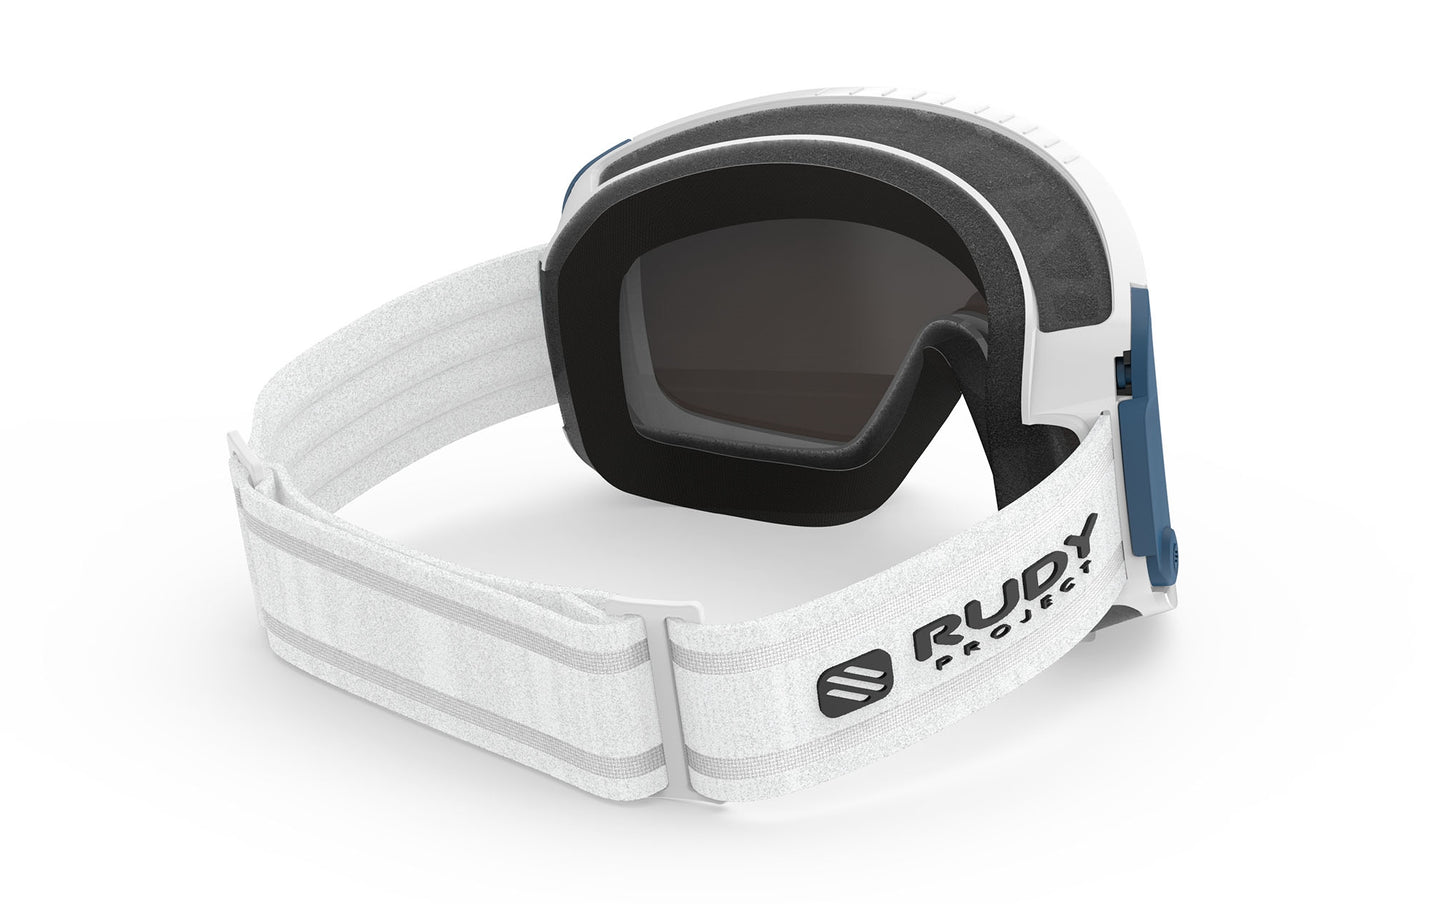 Rudy Project Spincut White Gloss Rp Ottica Multilaser Ghiaccio Dl